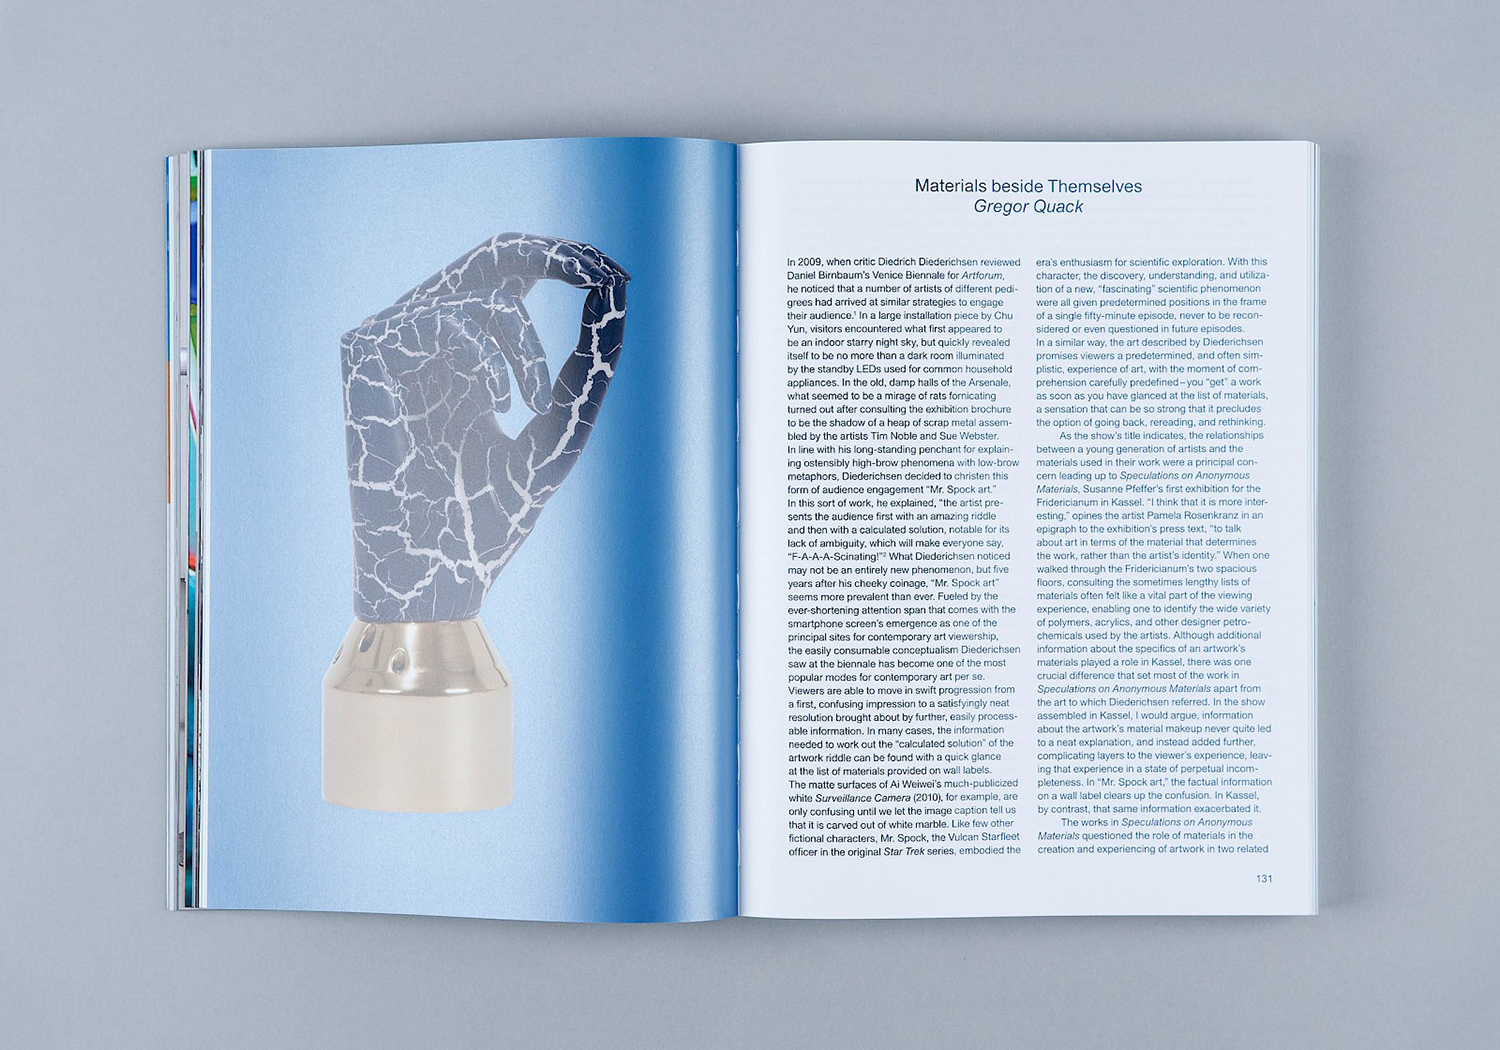 Catalogue by Zak Group for a trilogy of exhibitions that explore the theoretical lines separating the natural from and the artificial at Fridericianum